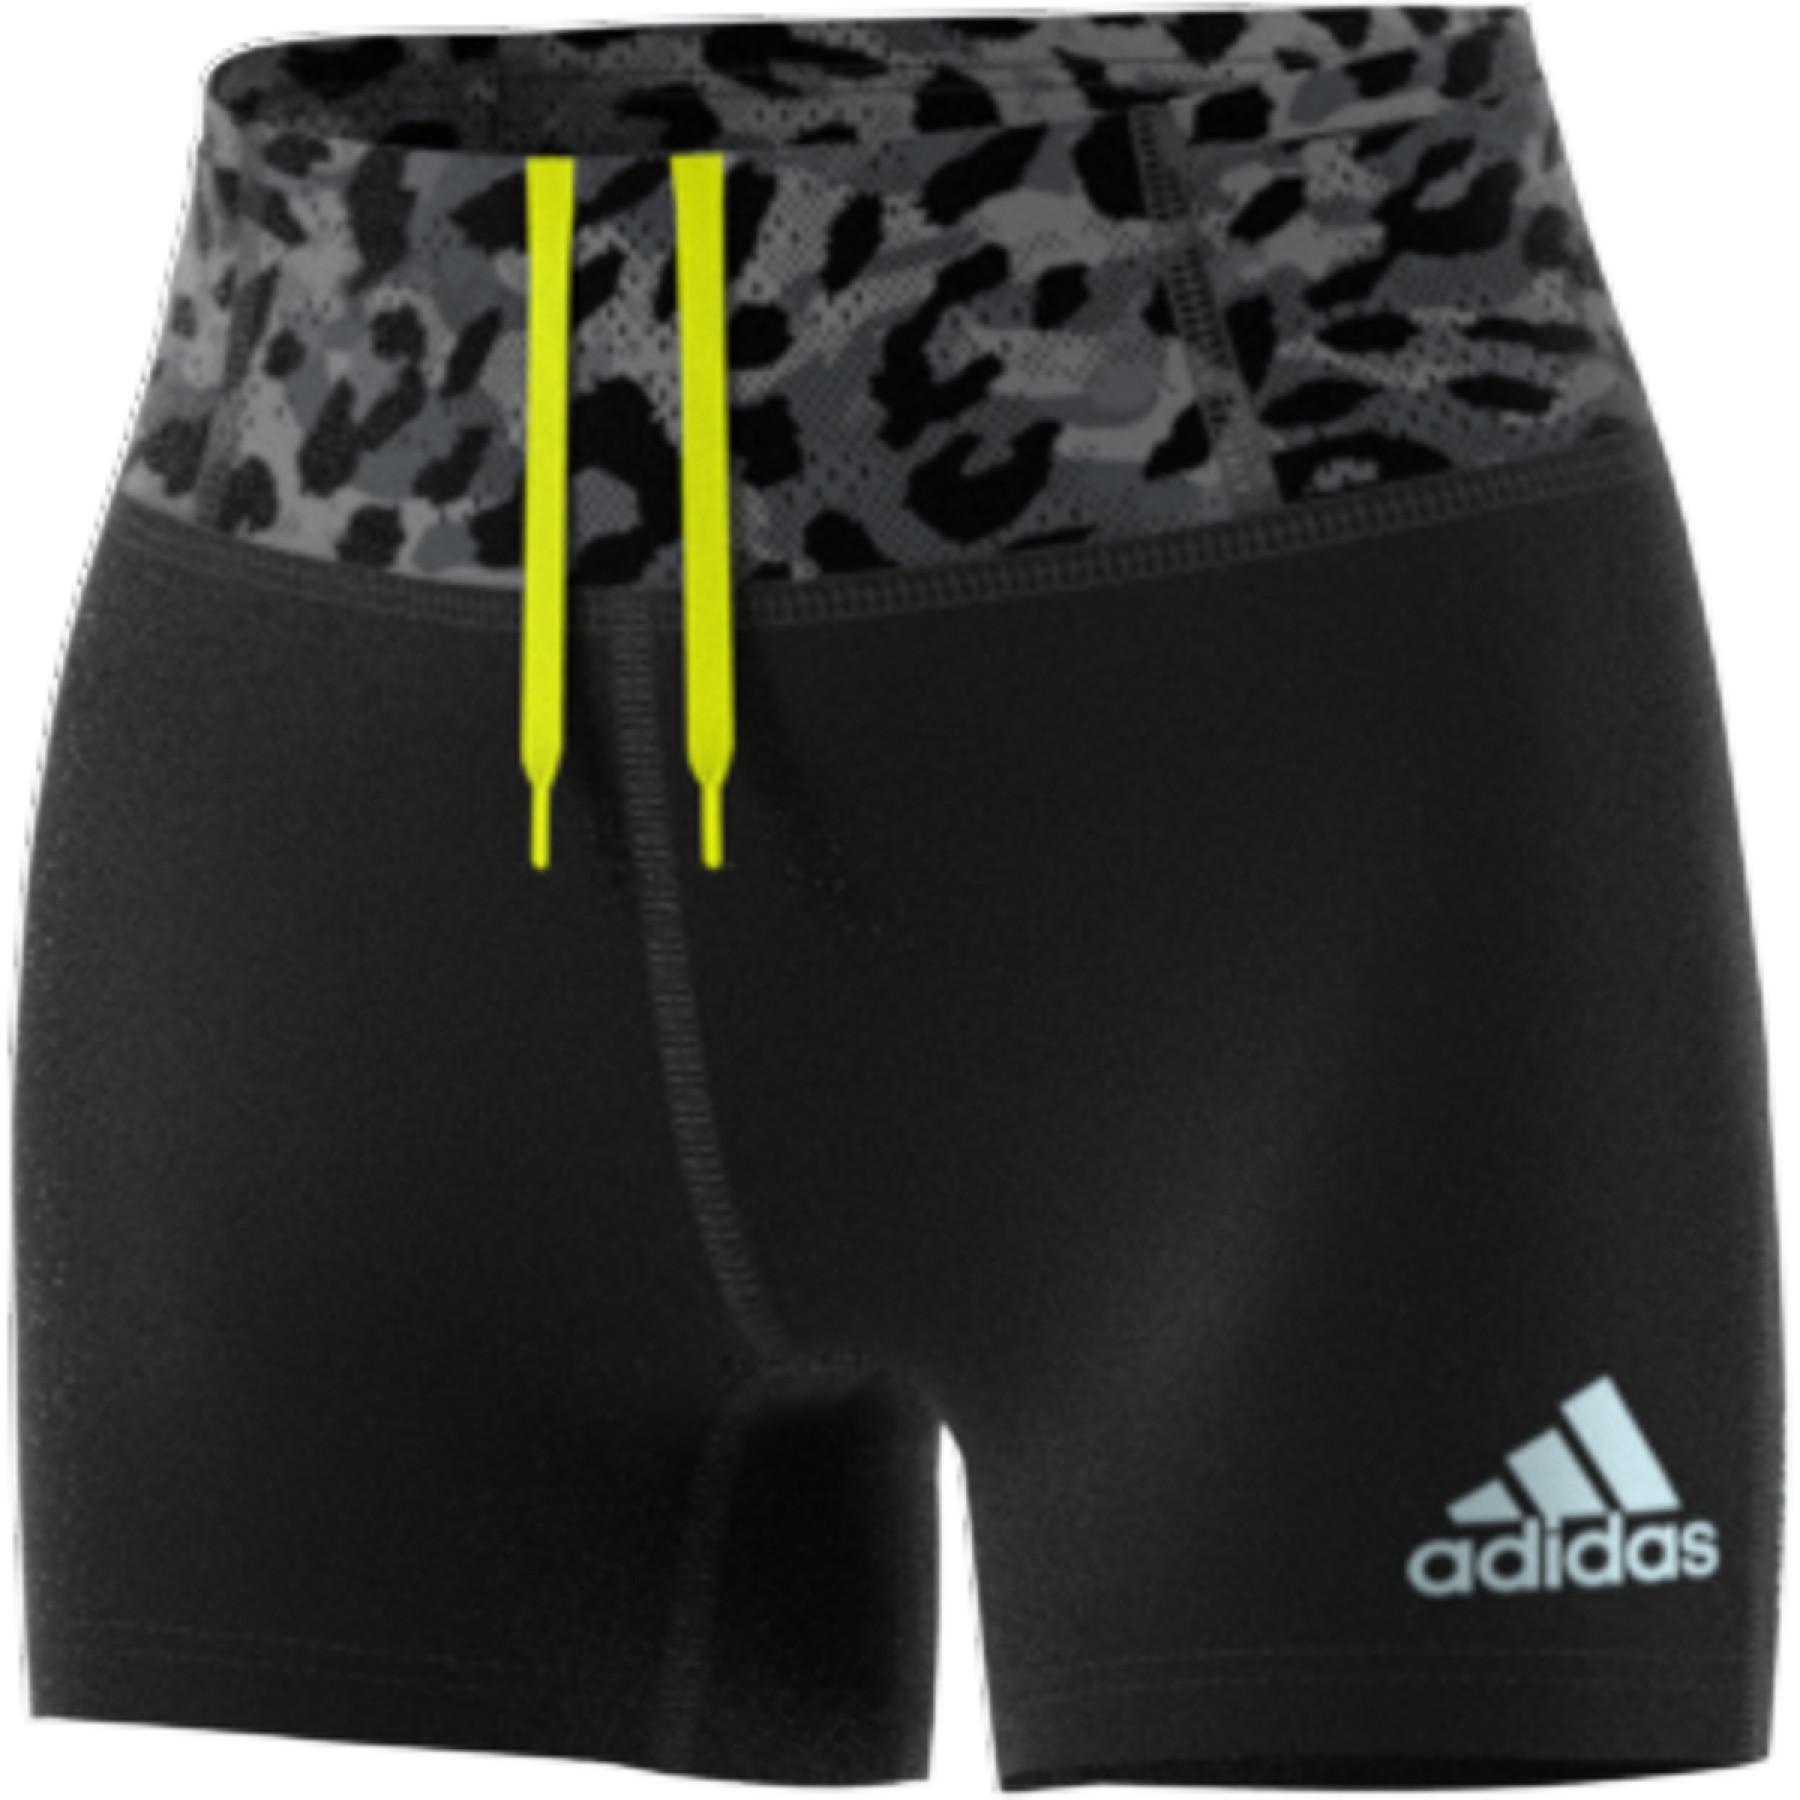 Women's shorts adidas Fast Primeblue Graphic Booty